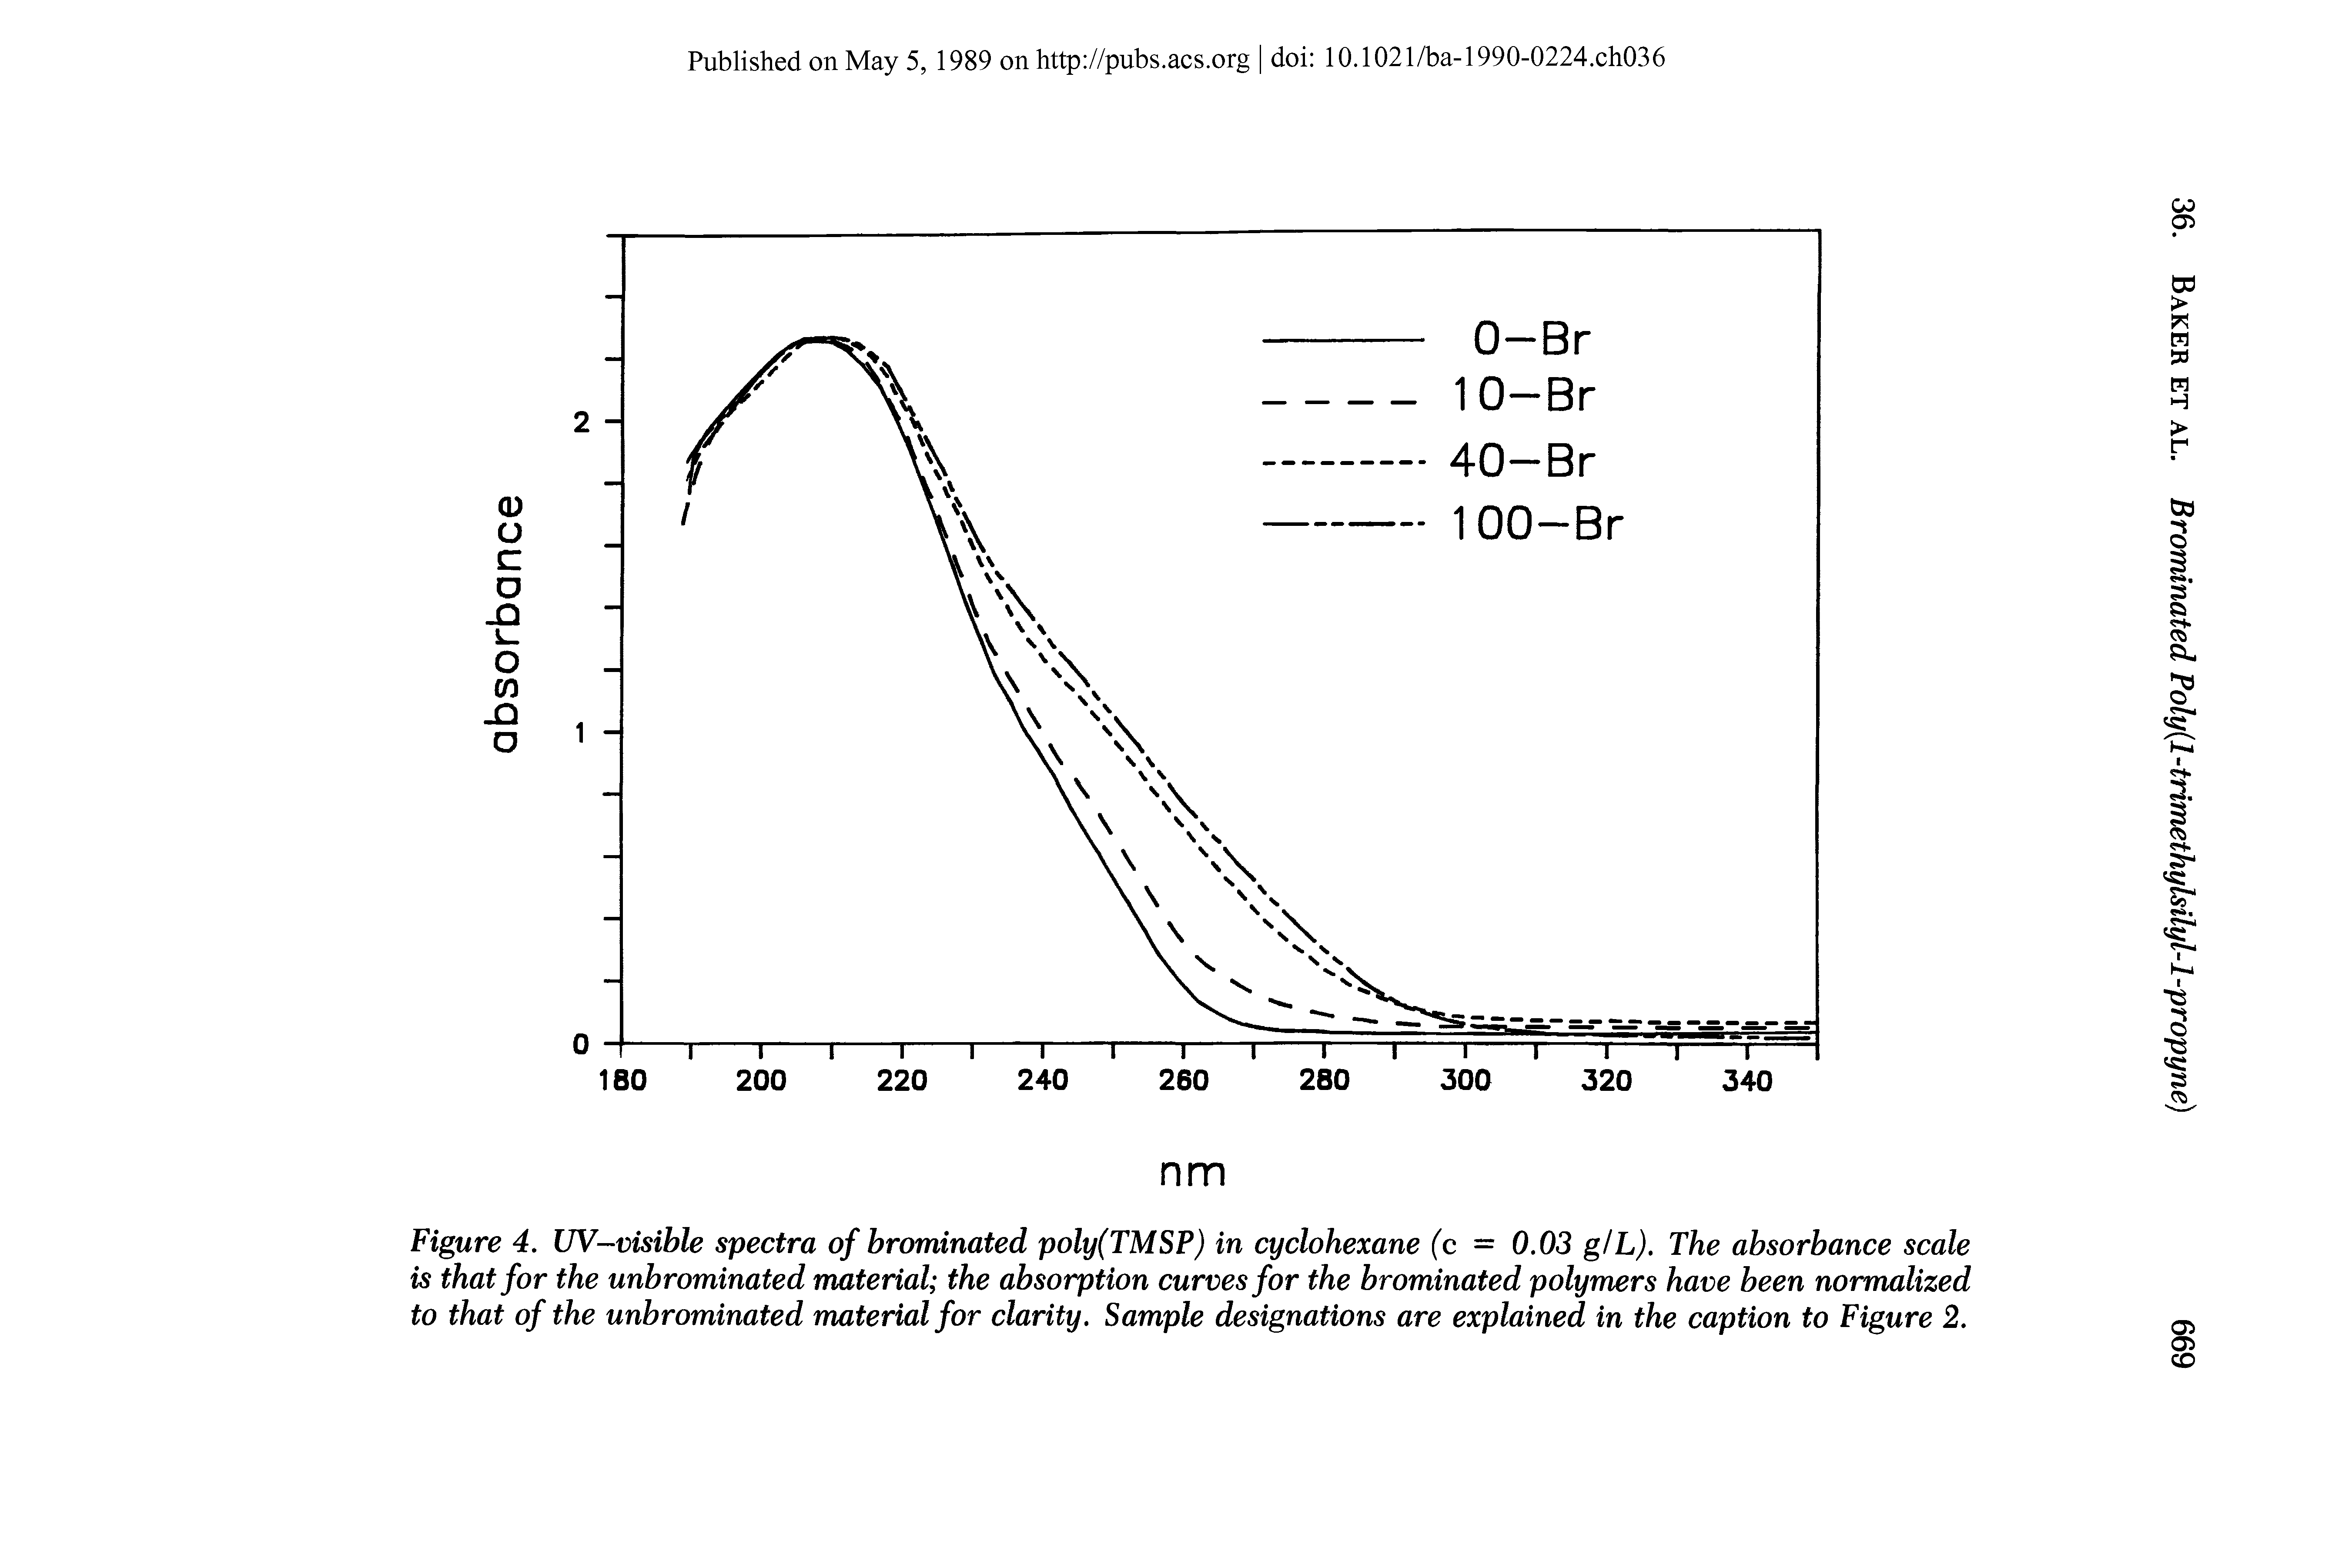 Figure 4. UV-visible spectra of brominated poly(TMSP) in cyclohexane (c — 0.03 giL). The absorbance scale is that for the unbrominated material the absorption curves for the brominated polymers have been normalized to that of the unbrominated material for clarity. Sample designations are explained in the caption to Figure 2.